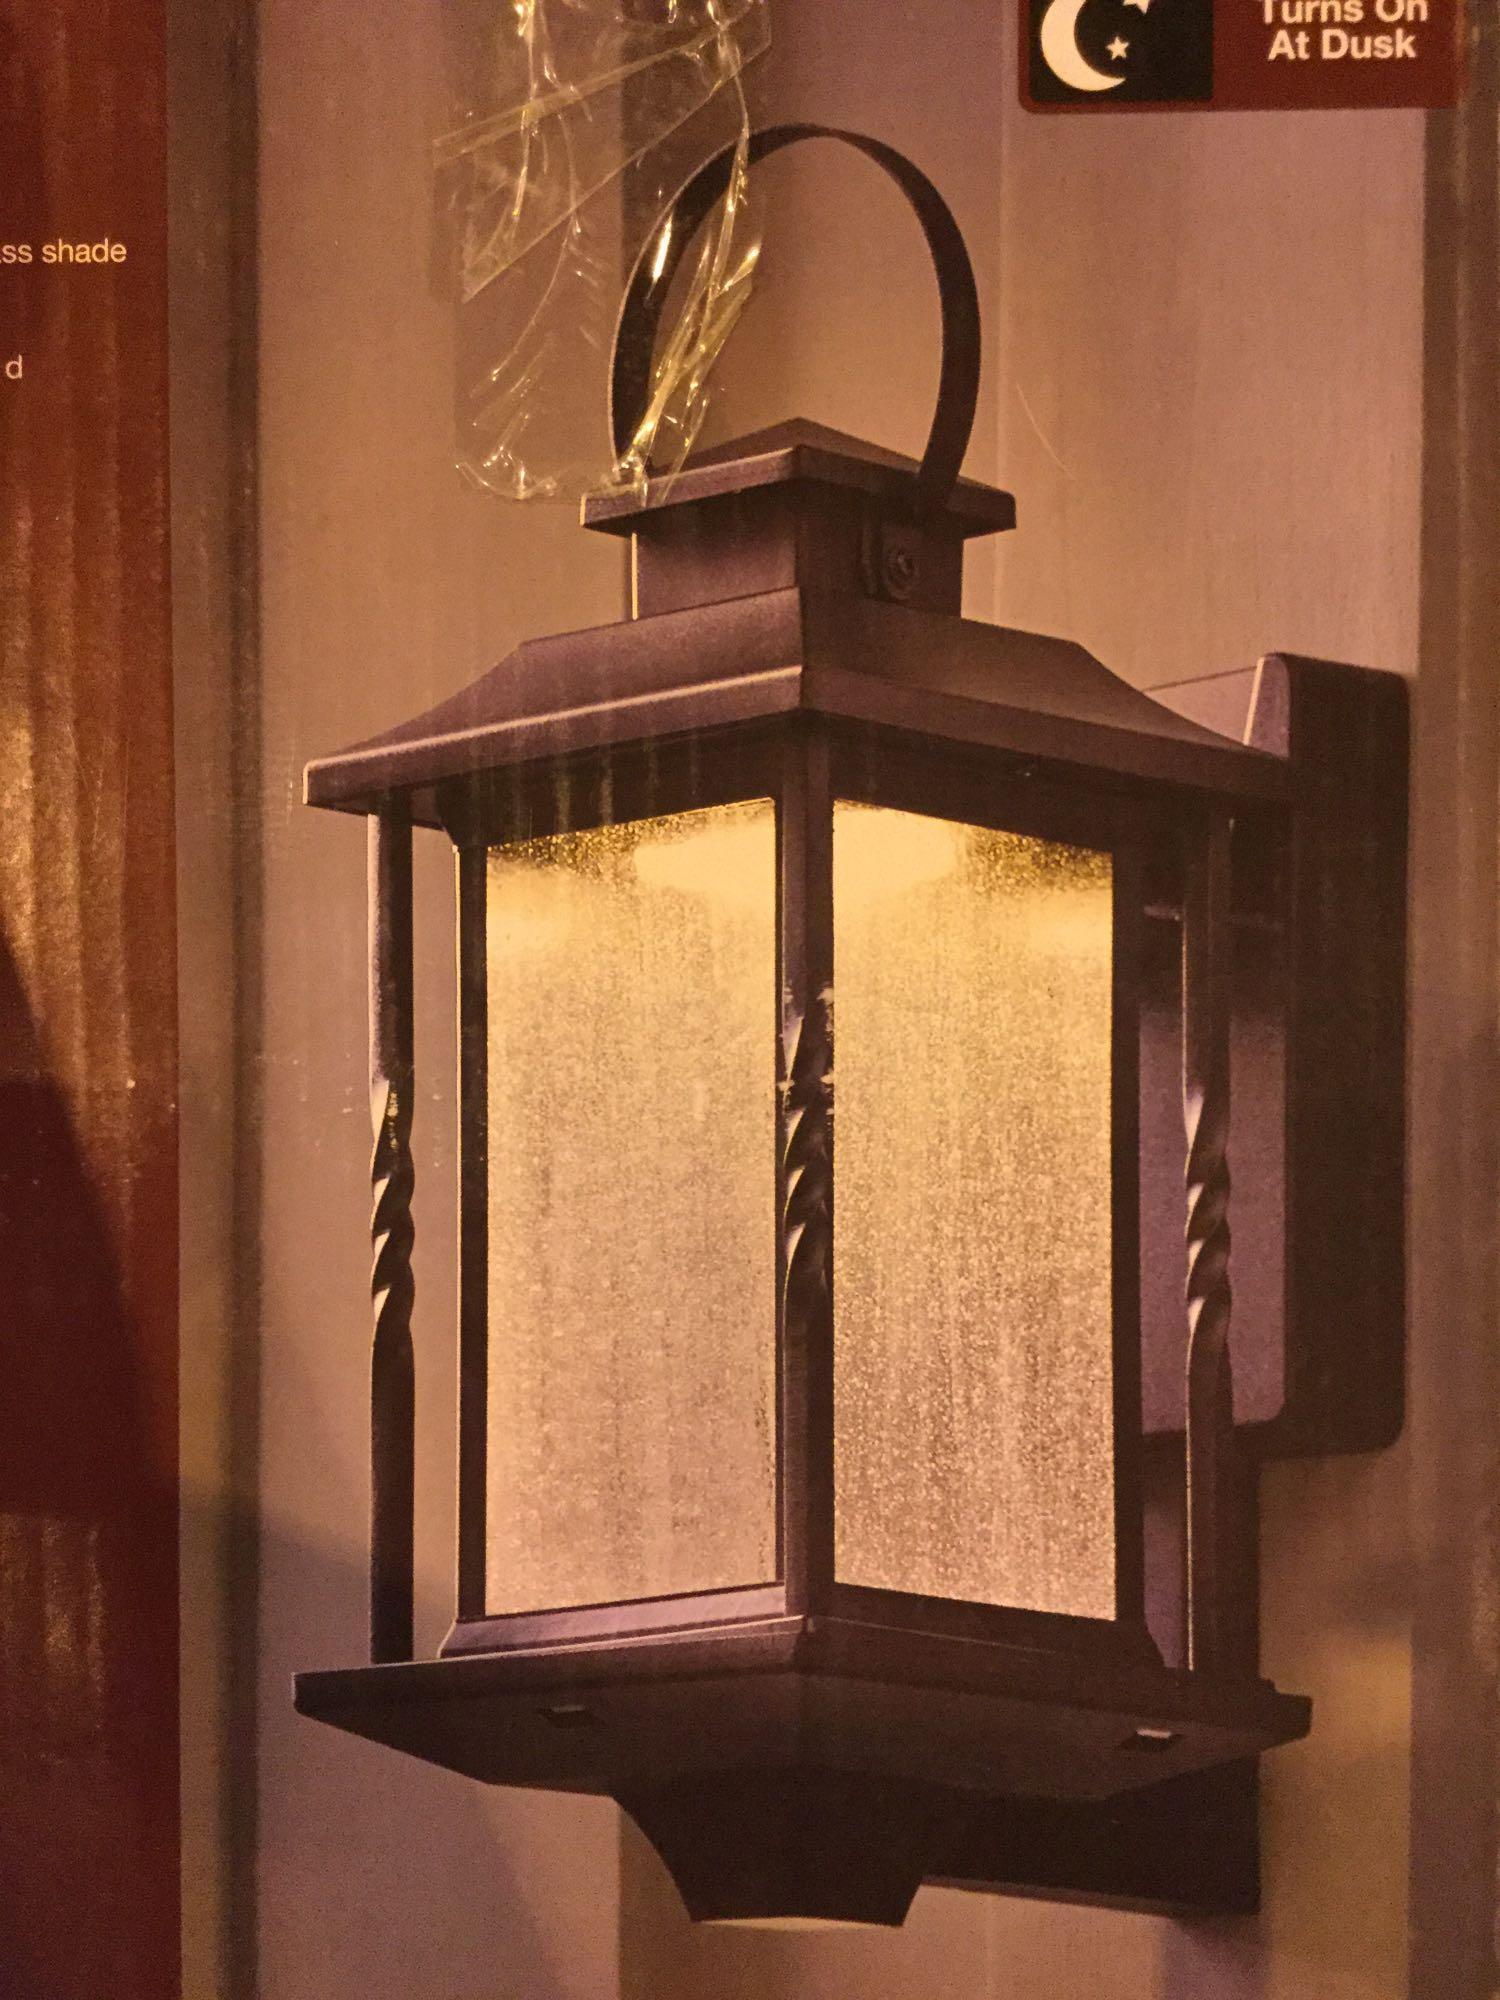 Home Decorators Collection Portable Black Outdoor Integrated LED Wall Mount Lantern, $100 MSRP